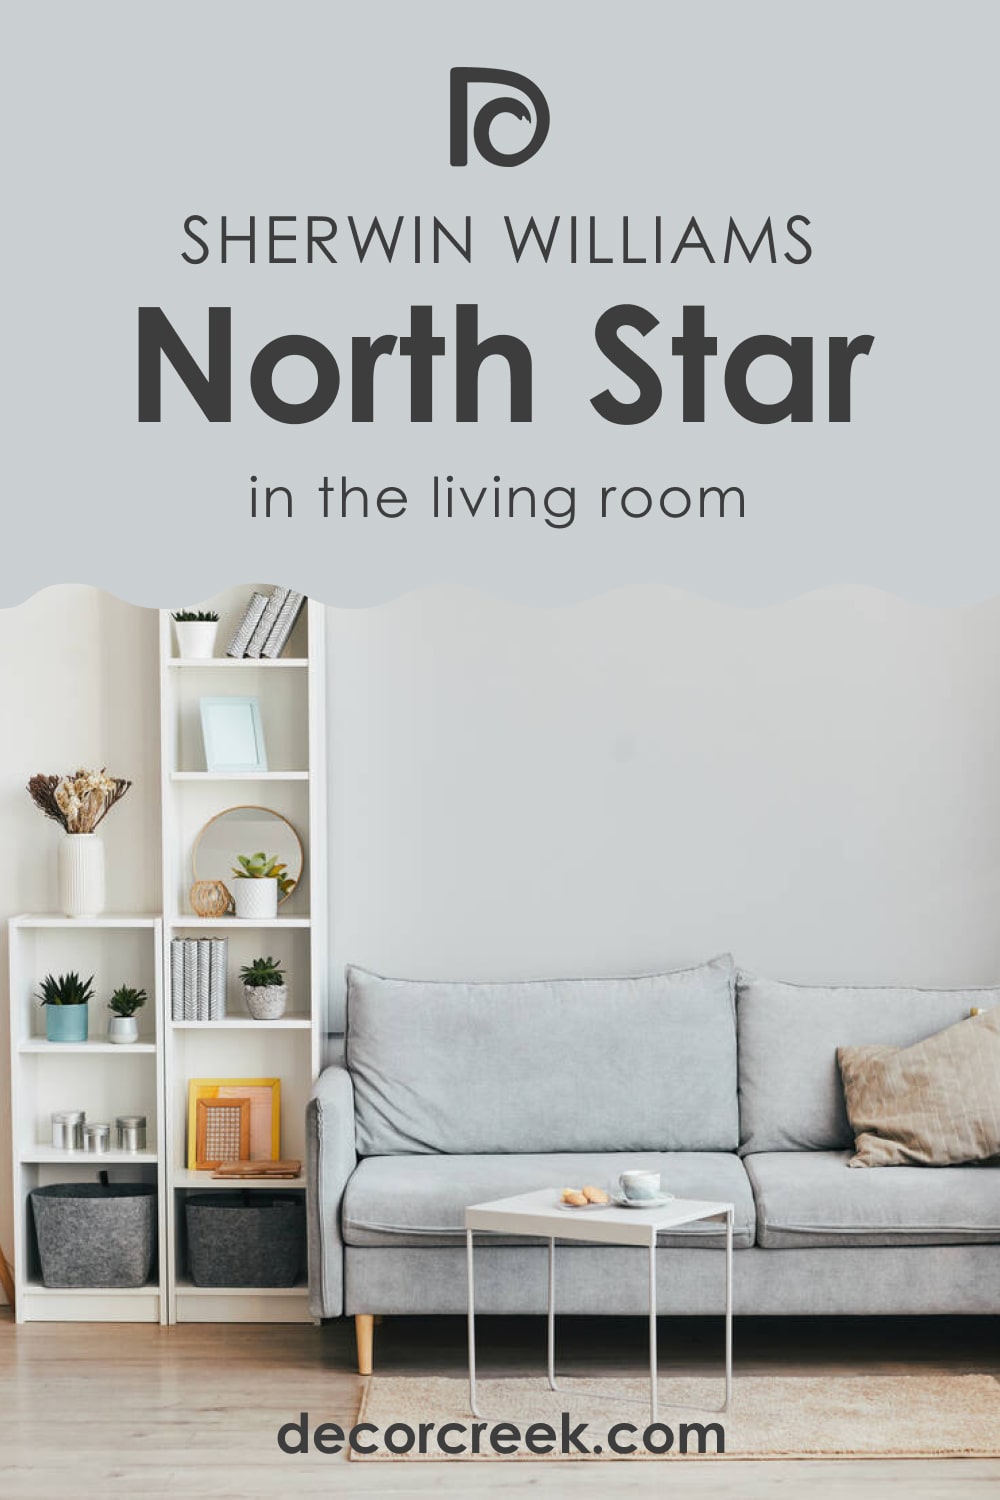 North Star SW-6246 in the Living Room